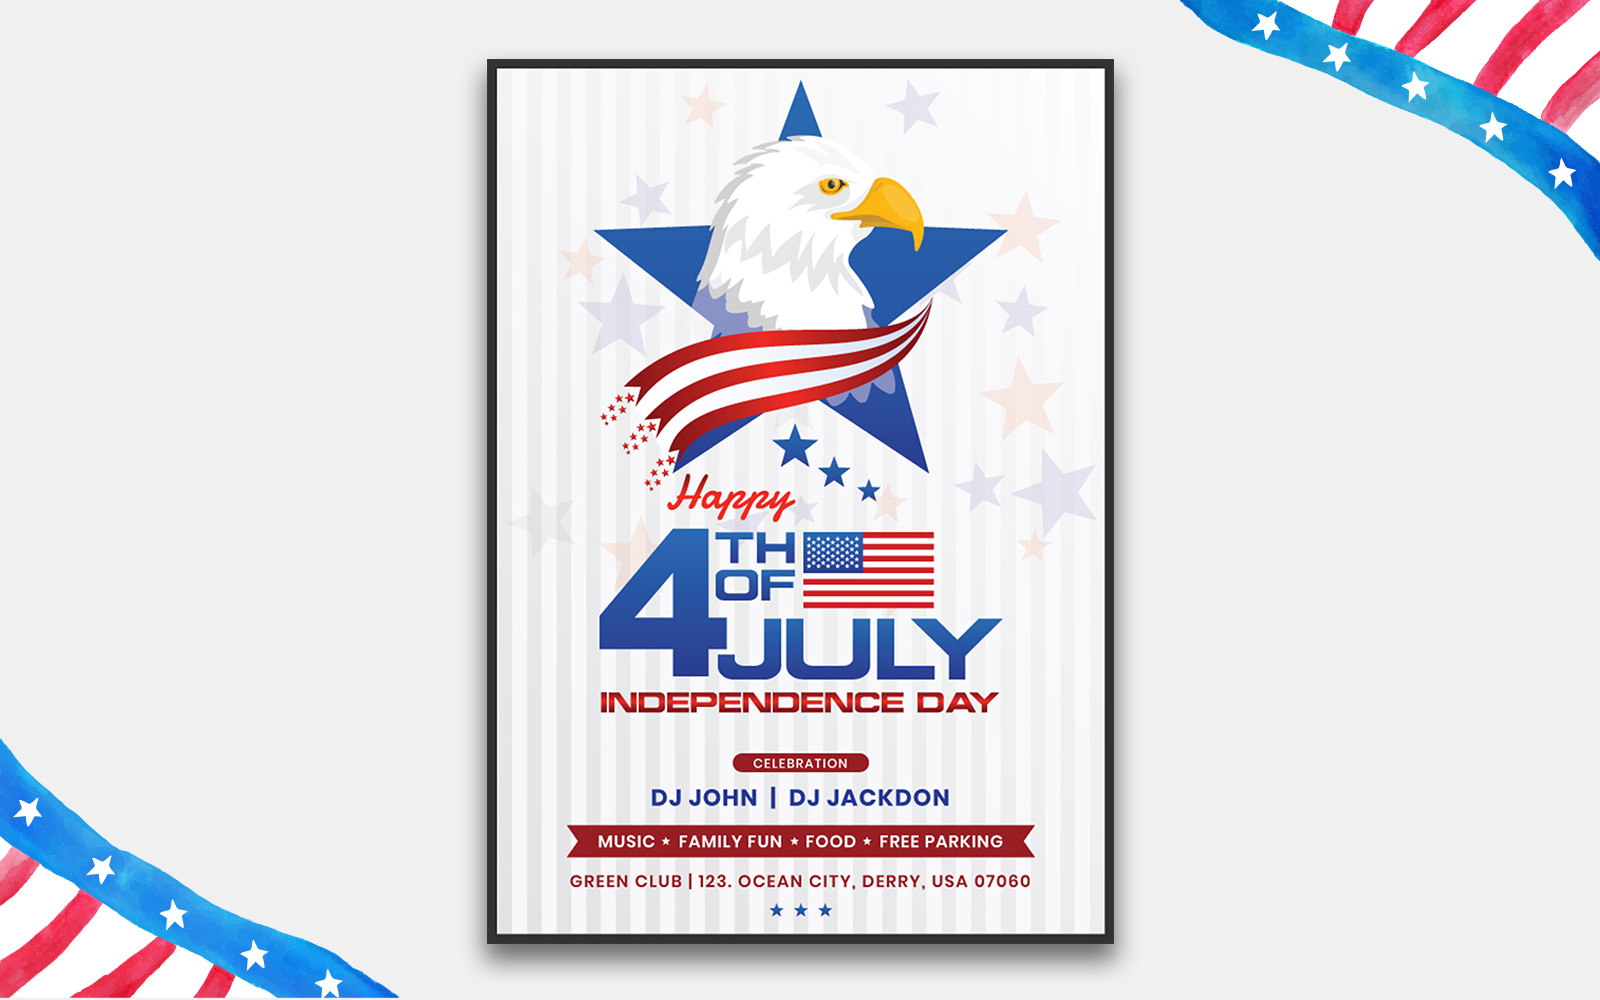 USA Independence Day Flyer - Eagle in Stars and Stripes Design